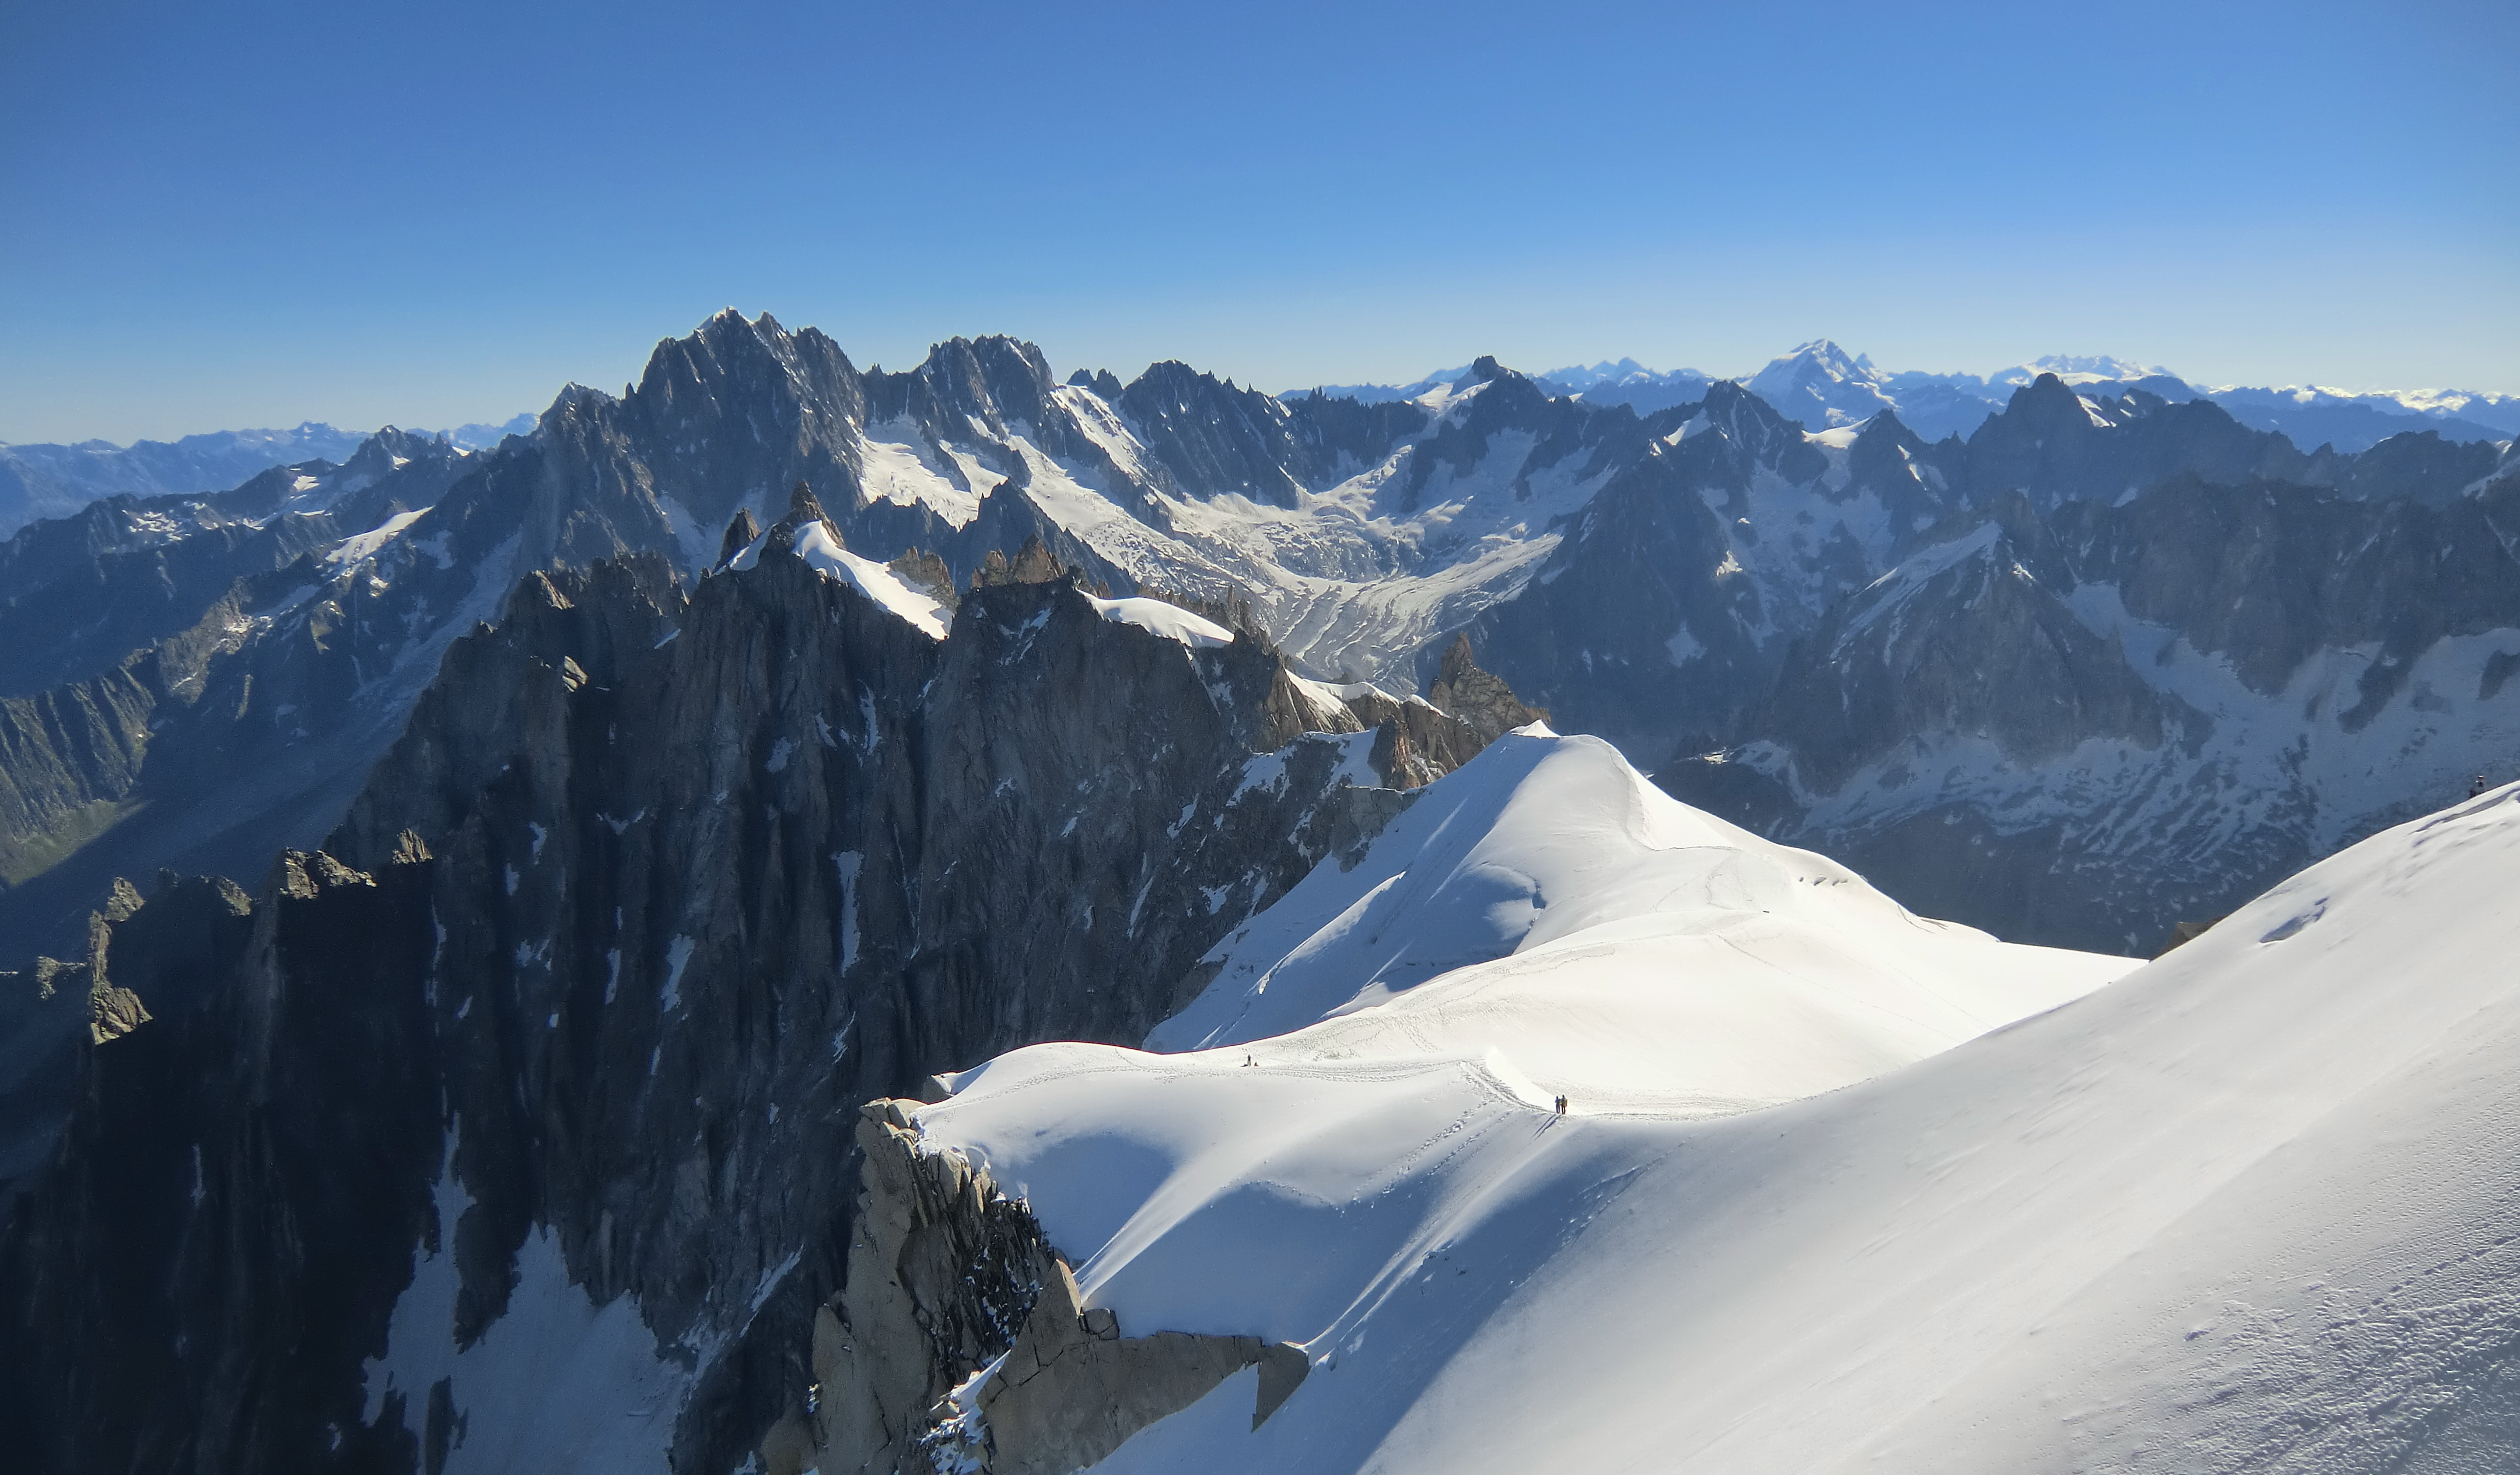 French Alps 4k Ultra HD Wallpaper. Background Imagex2529